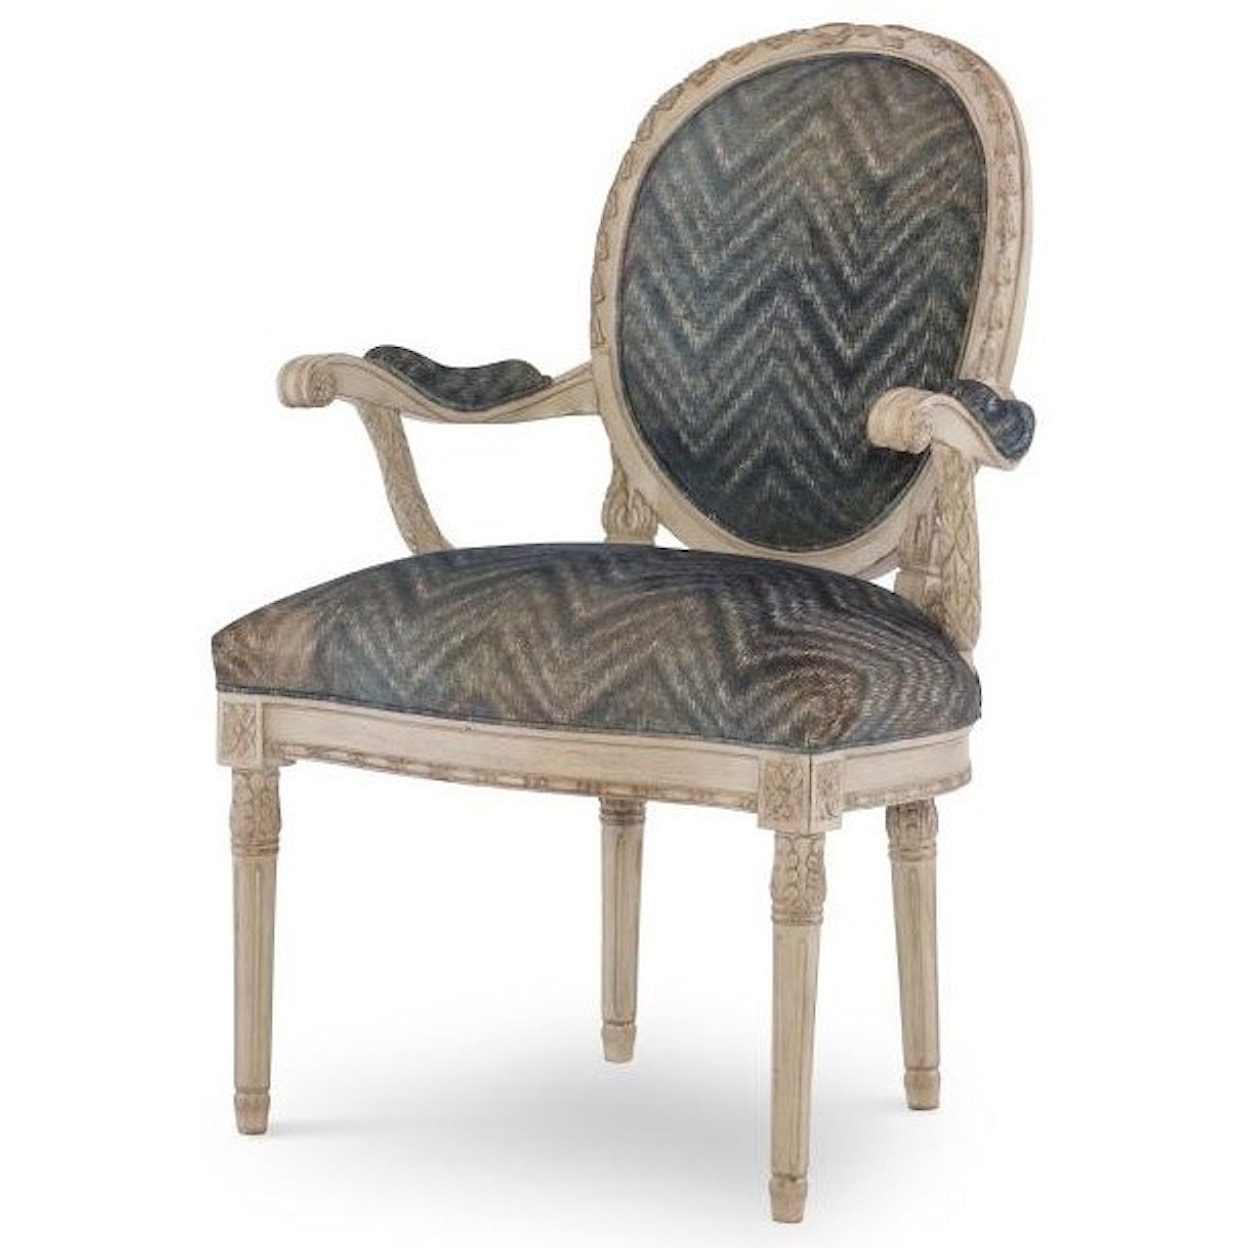 Century Century Chair Upholstered Back Chair